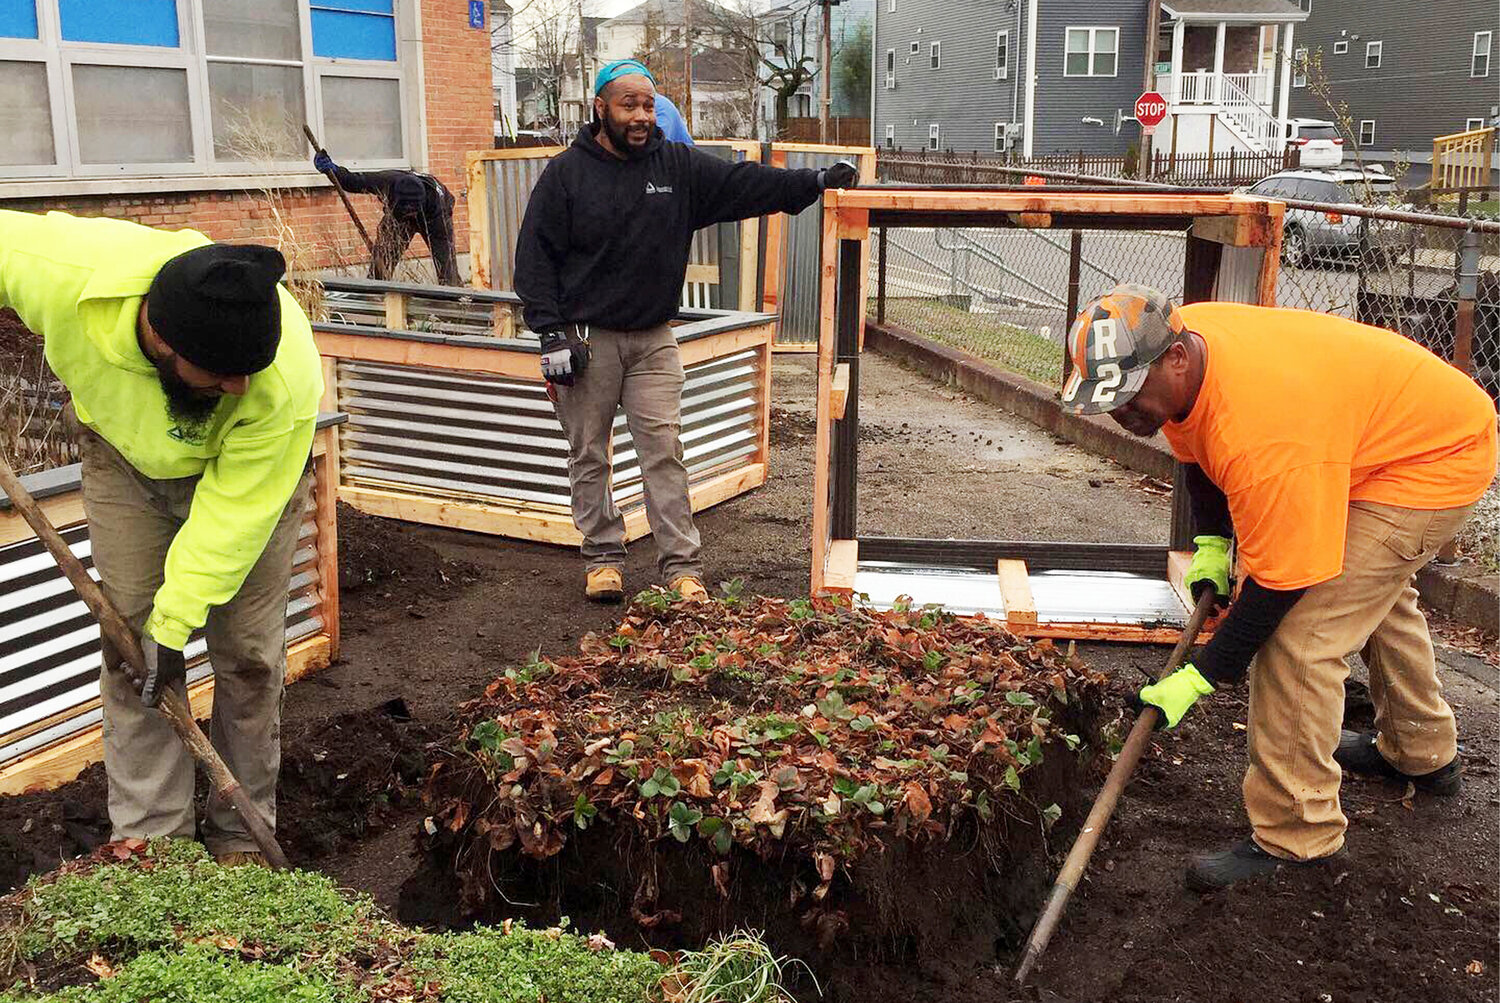 Through a grant from the Providence Public School District, Groundwork RI’s GroundCorp landscape crew was hired by Mary E. Fogarty Elementary School in South Providence to rebuild its school garden in 2022.